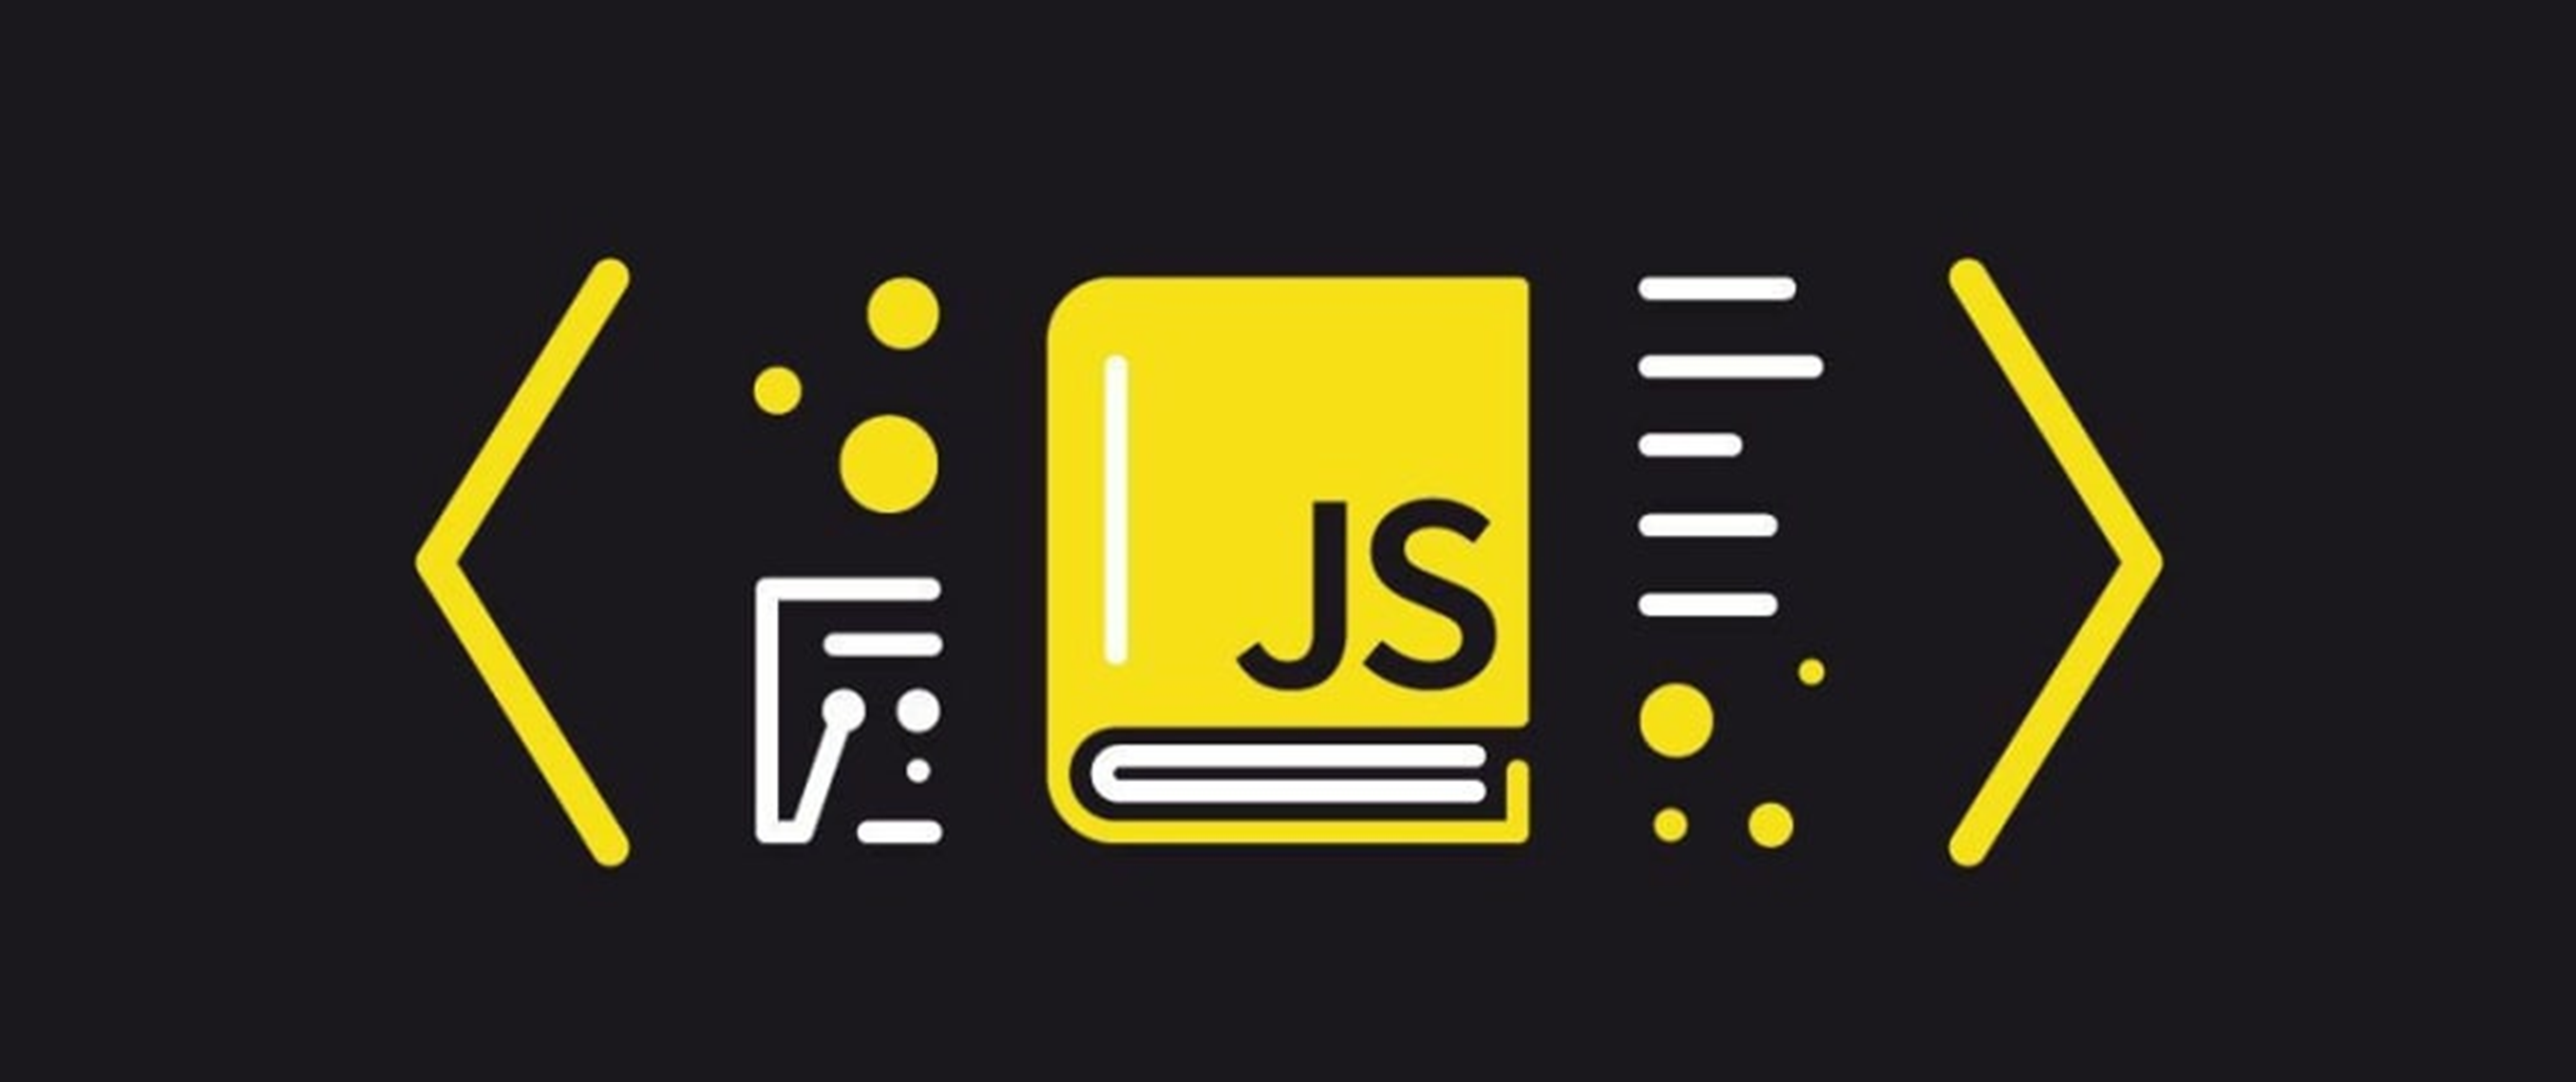 JavaScript tips and hints